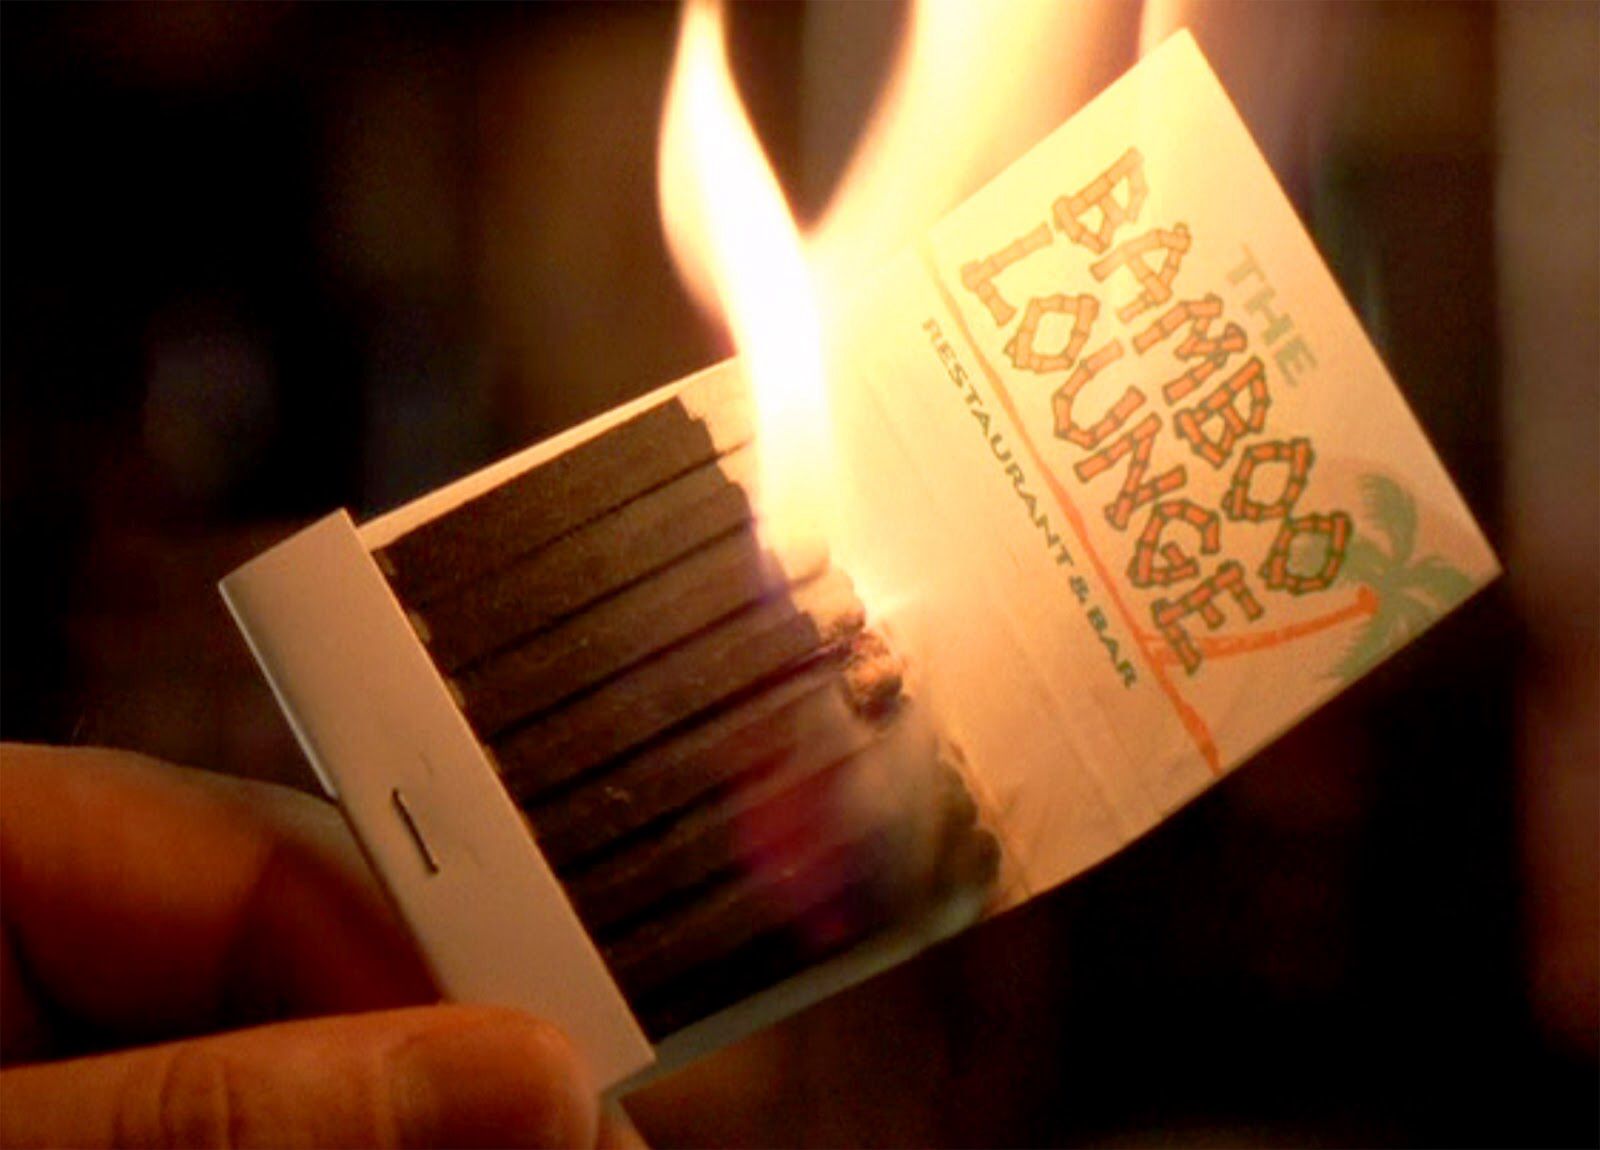 A book of matches, lit, ready to burn down the Bamboo Lounge from the film, Goodfellas